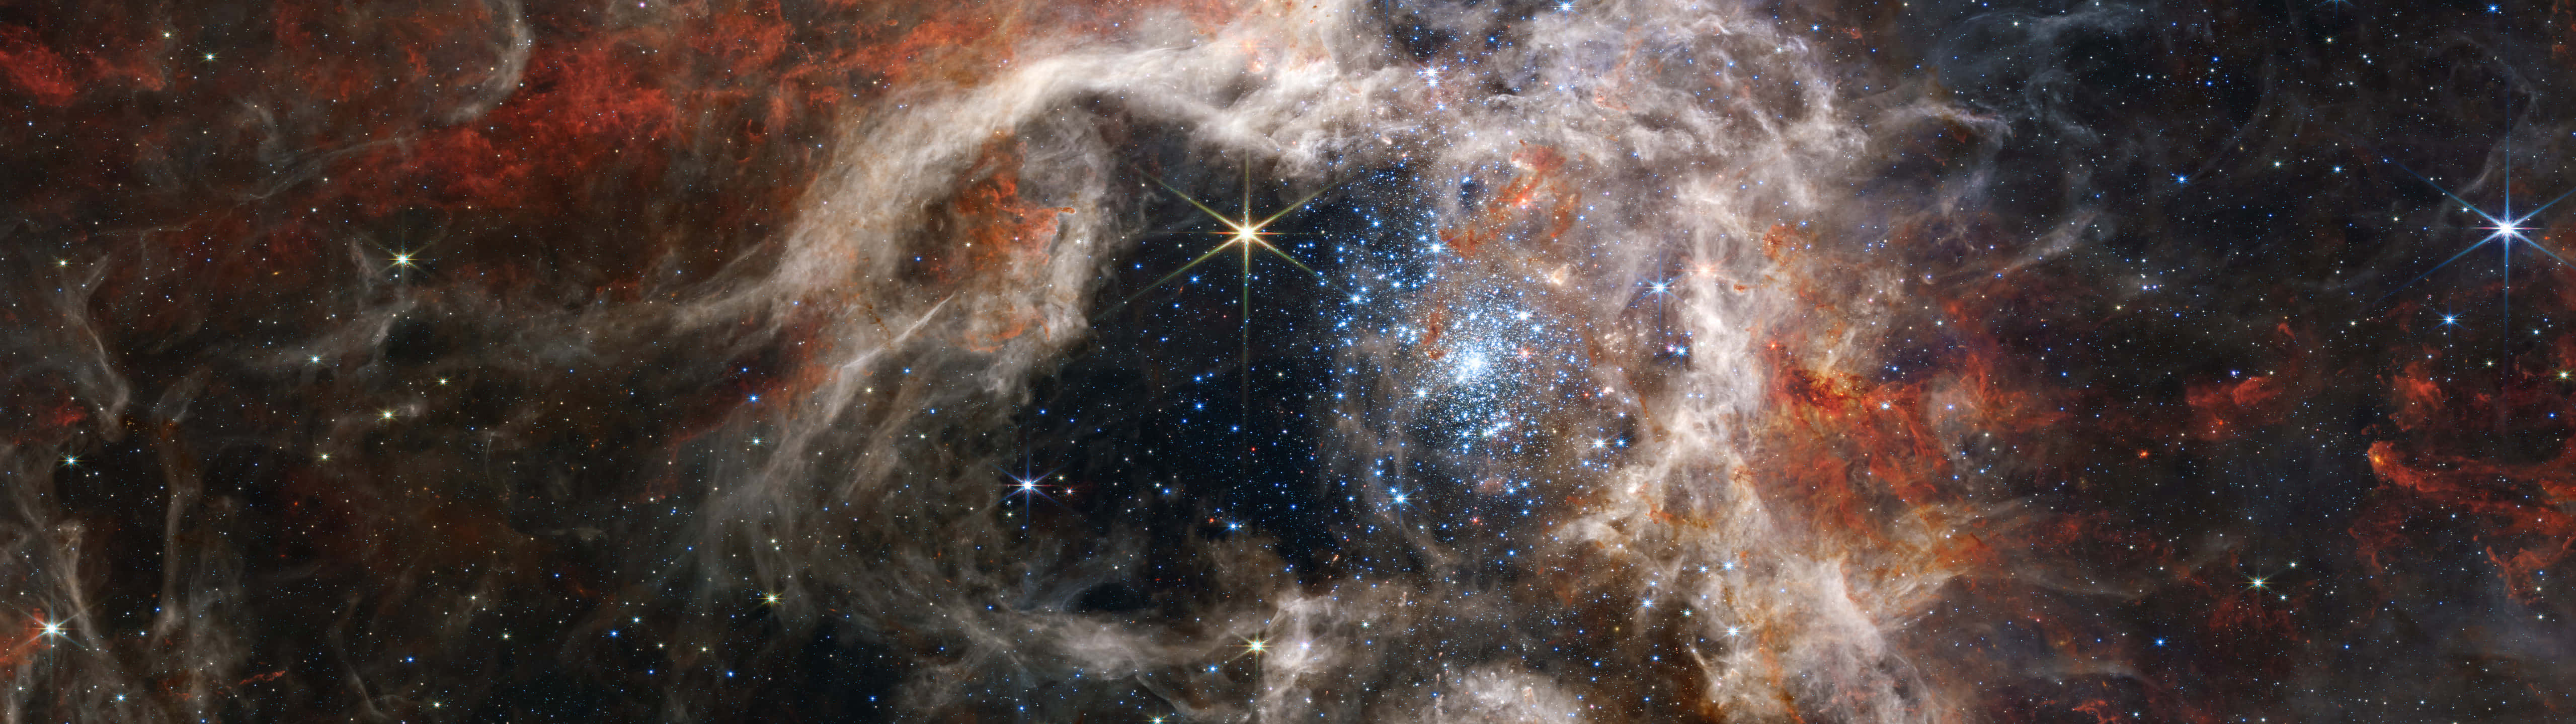 A Space Image Of A Star Cluster